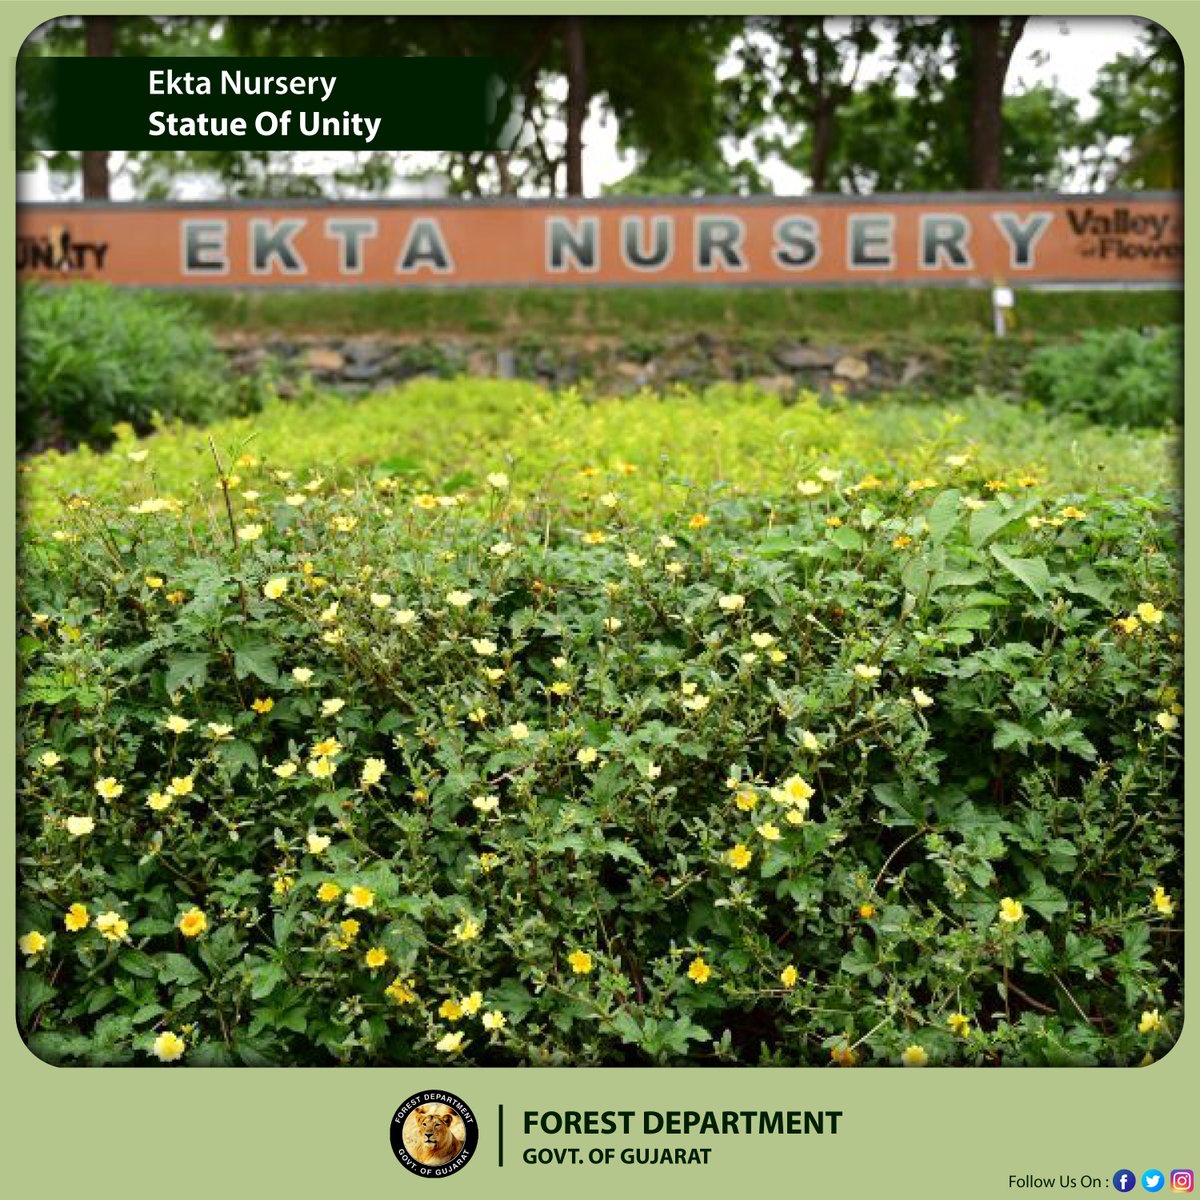 #EktaNursery will focus on various traditional Eco-friendly products with a live demonstration of their production process& is in line with the Hon’ble Prime Minister’s vision that visitors,when they return,should take back with them seedlings as a Plant of Unity.

#GujForestDept